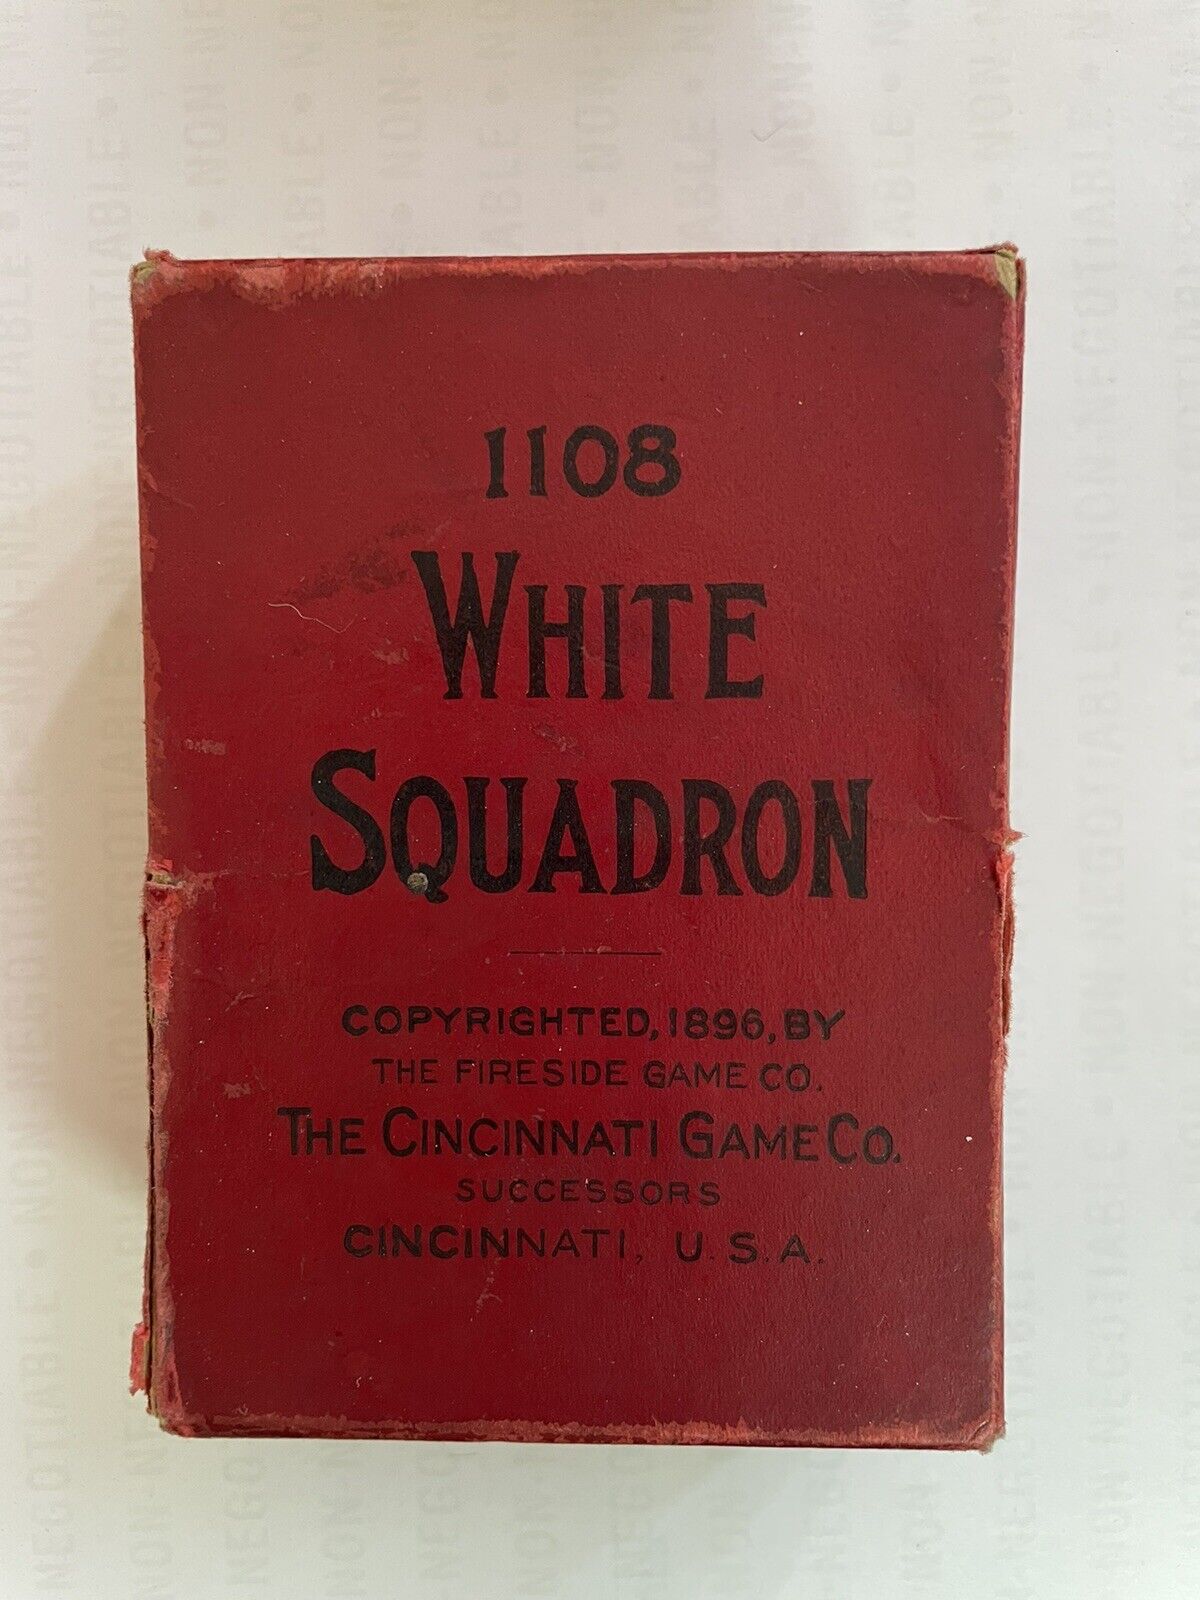 white squadron RARE 1896 playing cards #1108